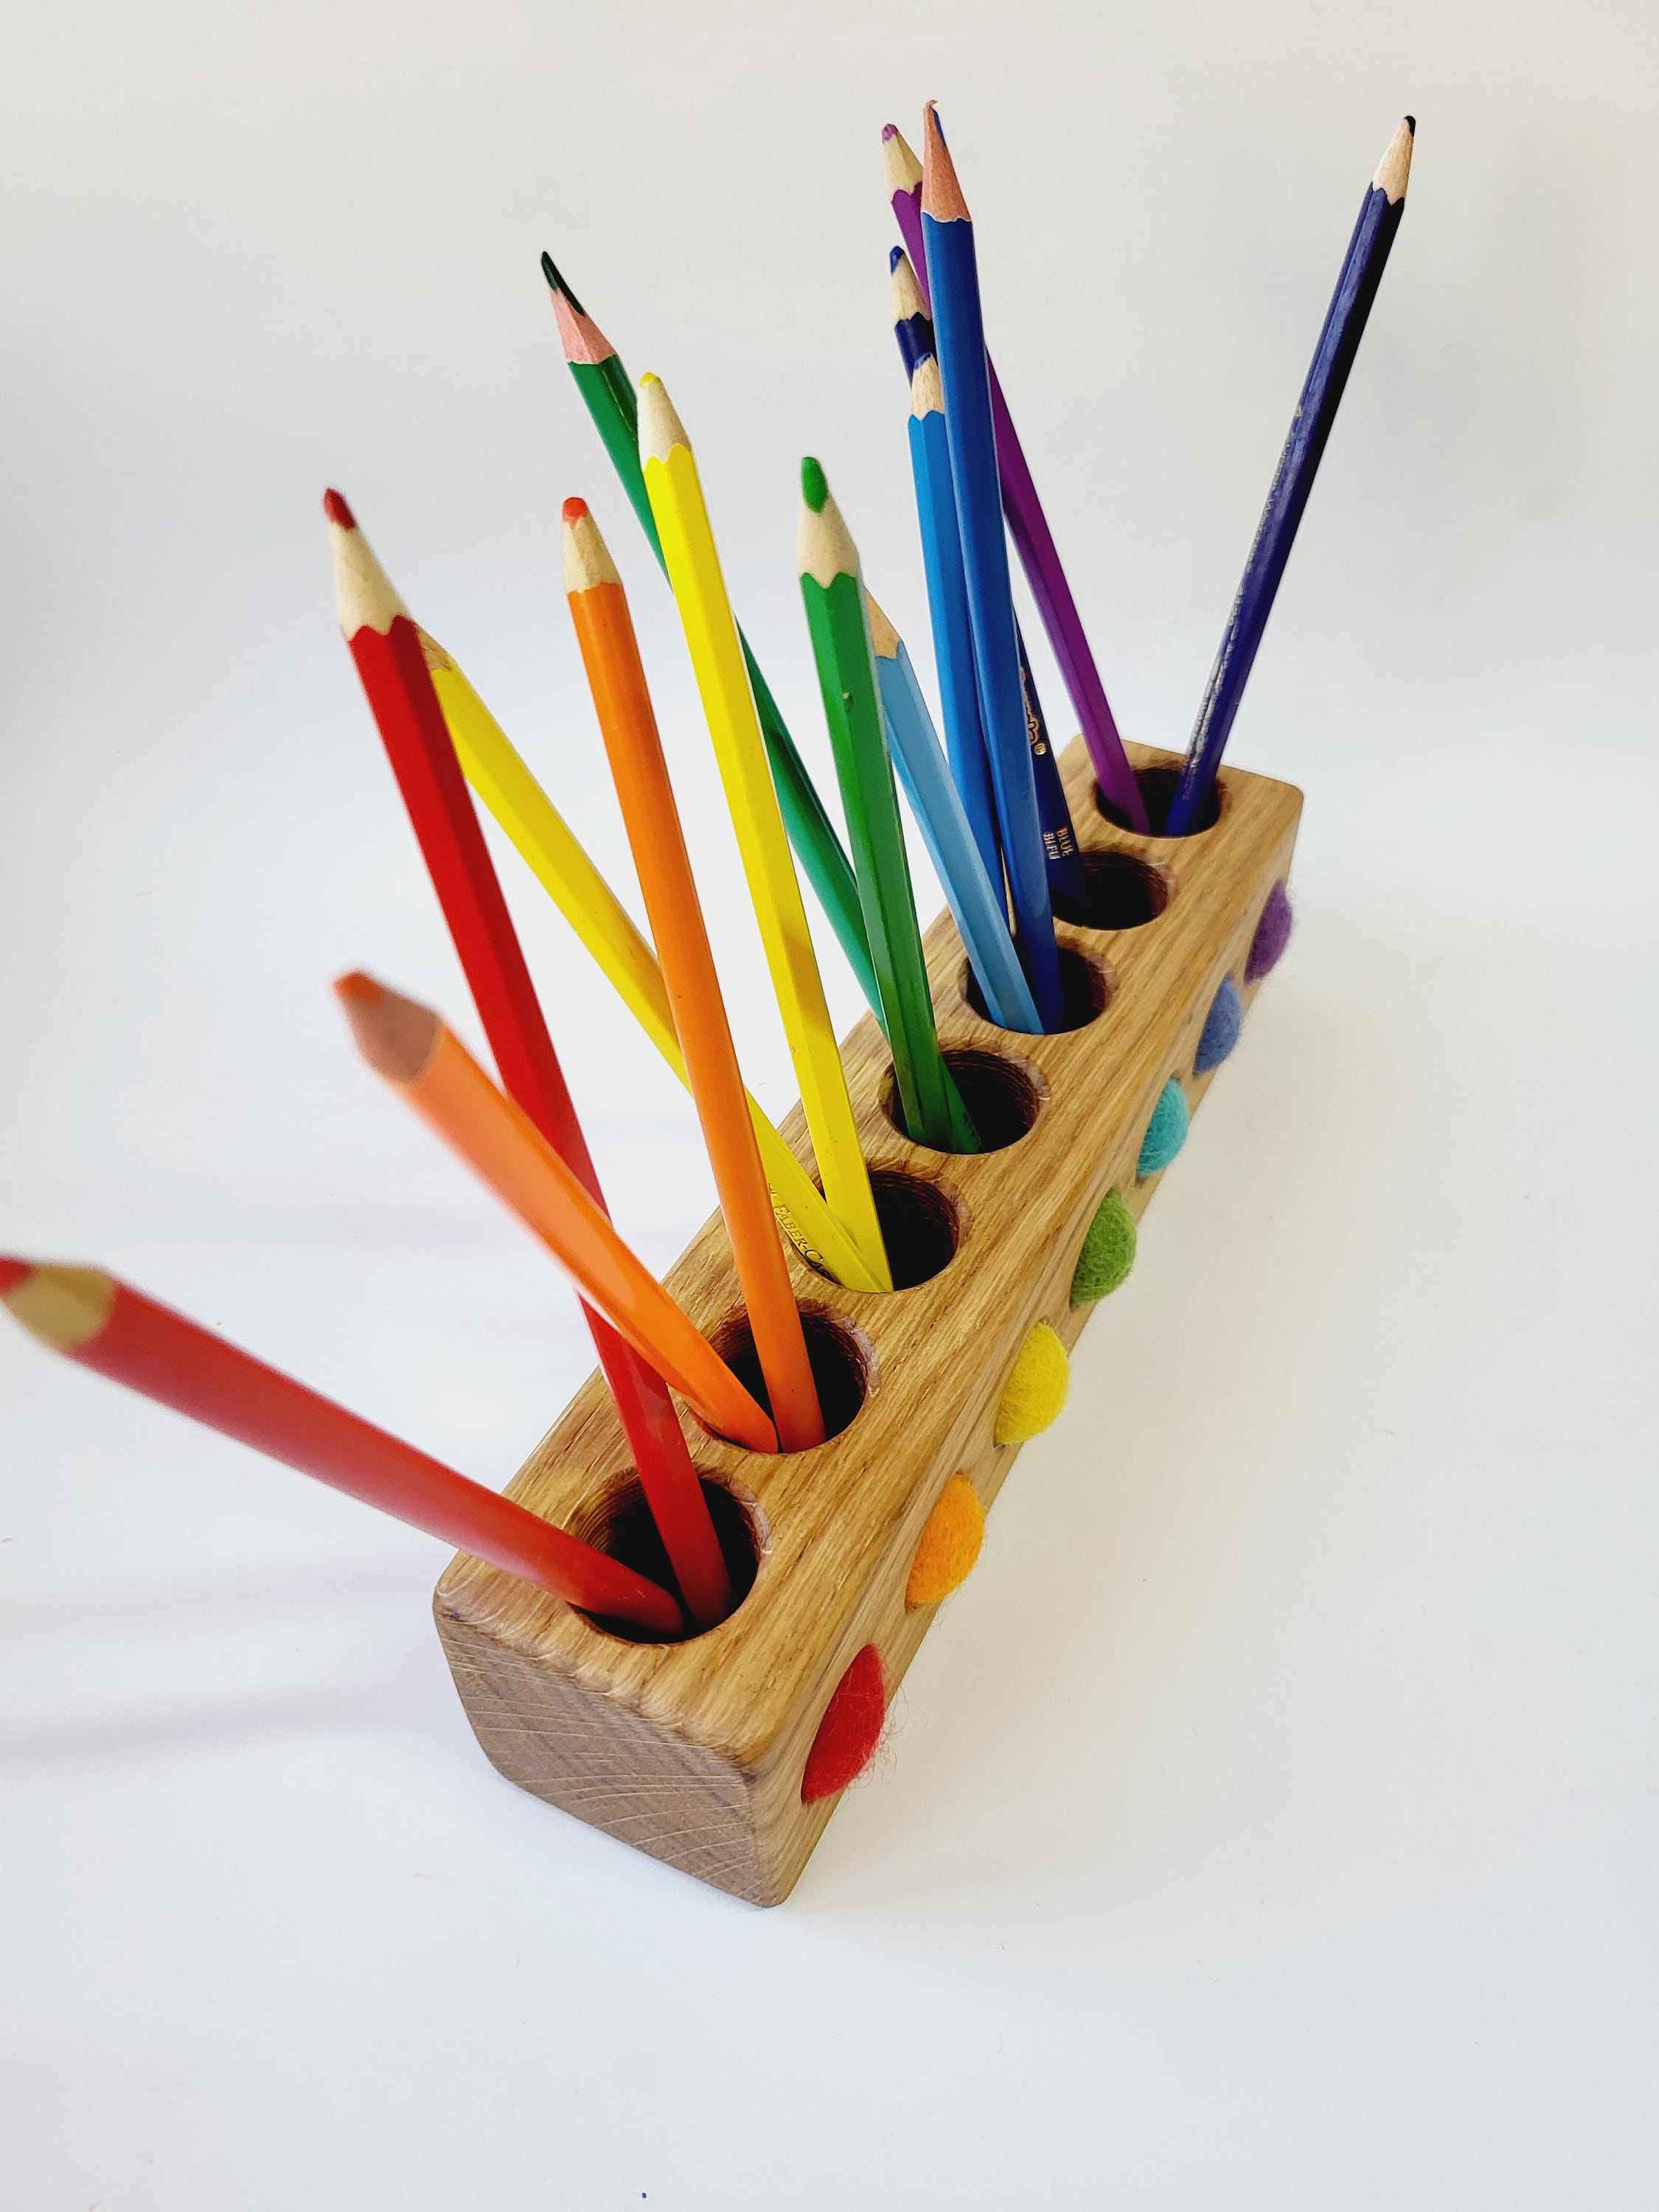 MyGift Multi Colored Solid Wood Pencil Holder Pen Cup, Desktop Stationery Office Supplies Holder for Rulers, Scissors, Markers, Colored Pencils, Set